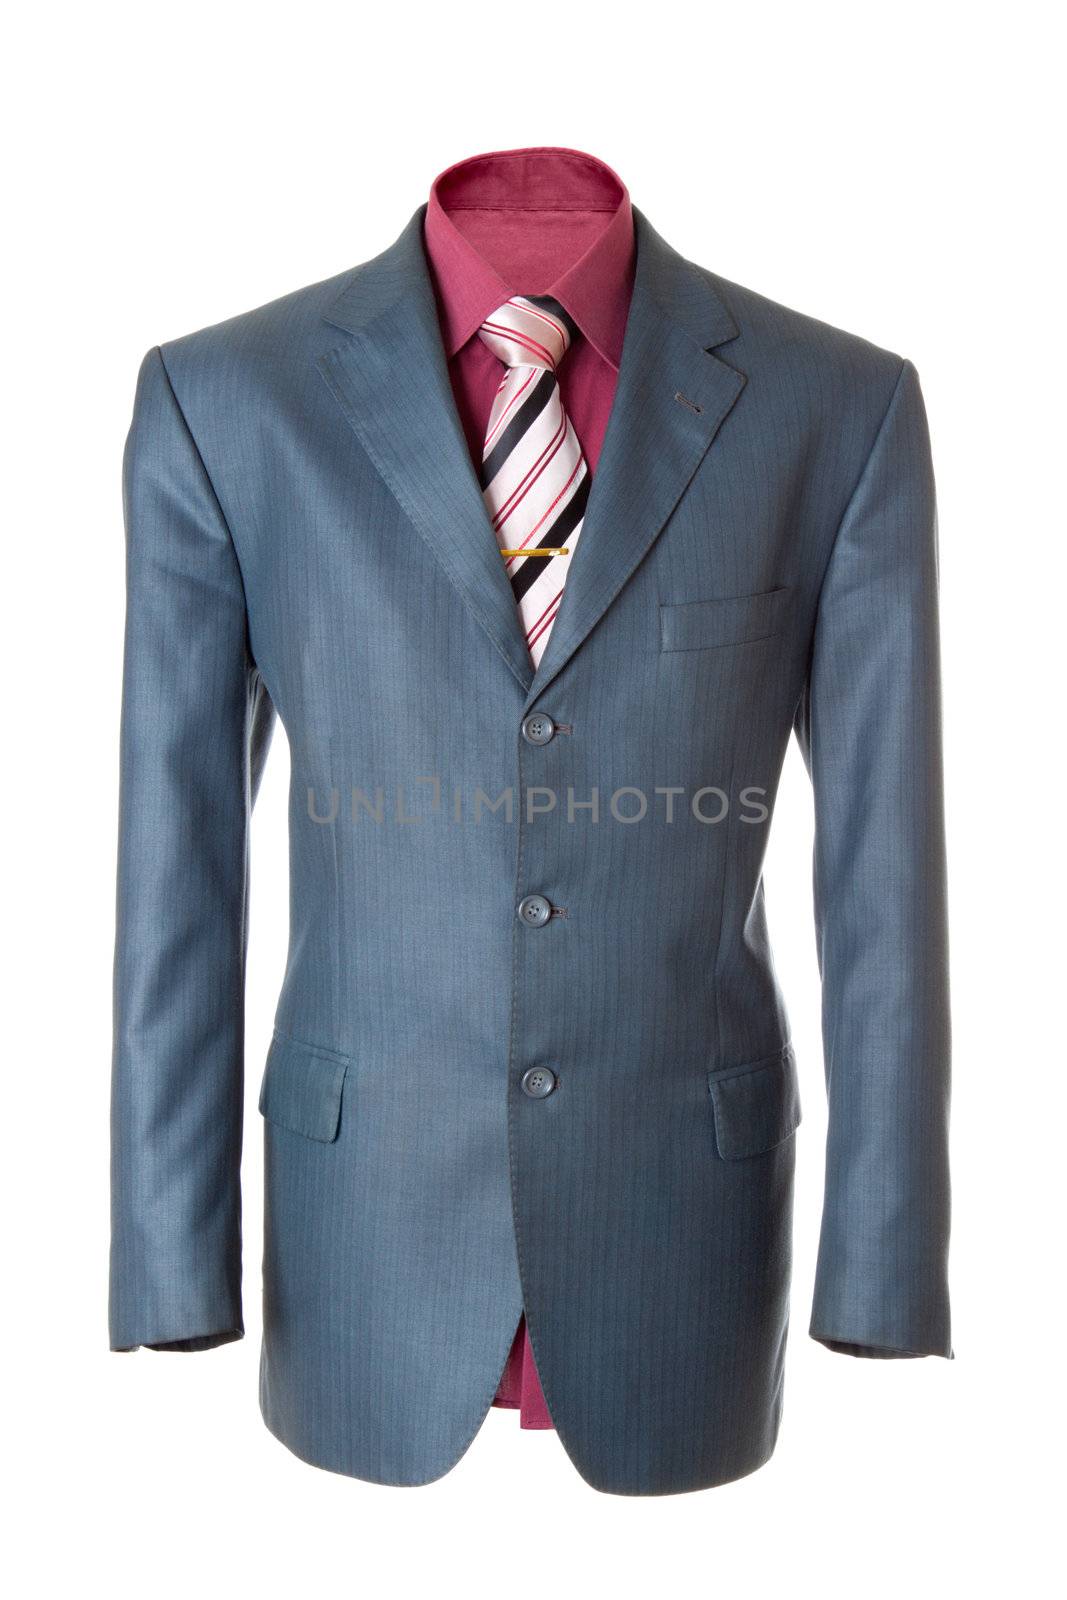 Empty light office jacket for manager. Also red shirt, necktie and golden clip. Isolated over white